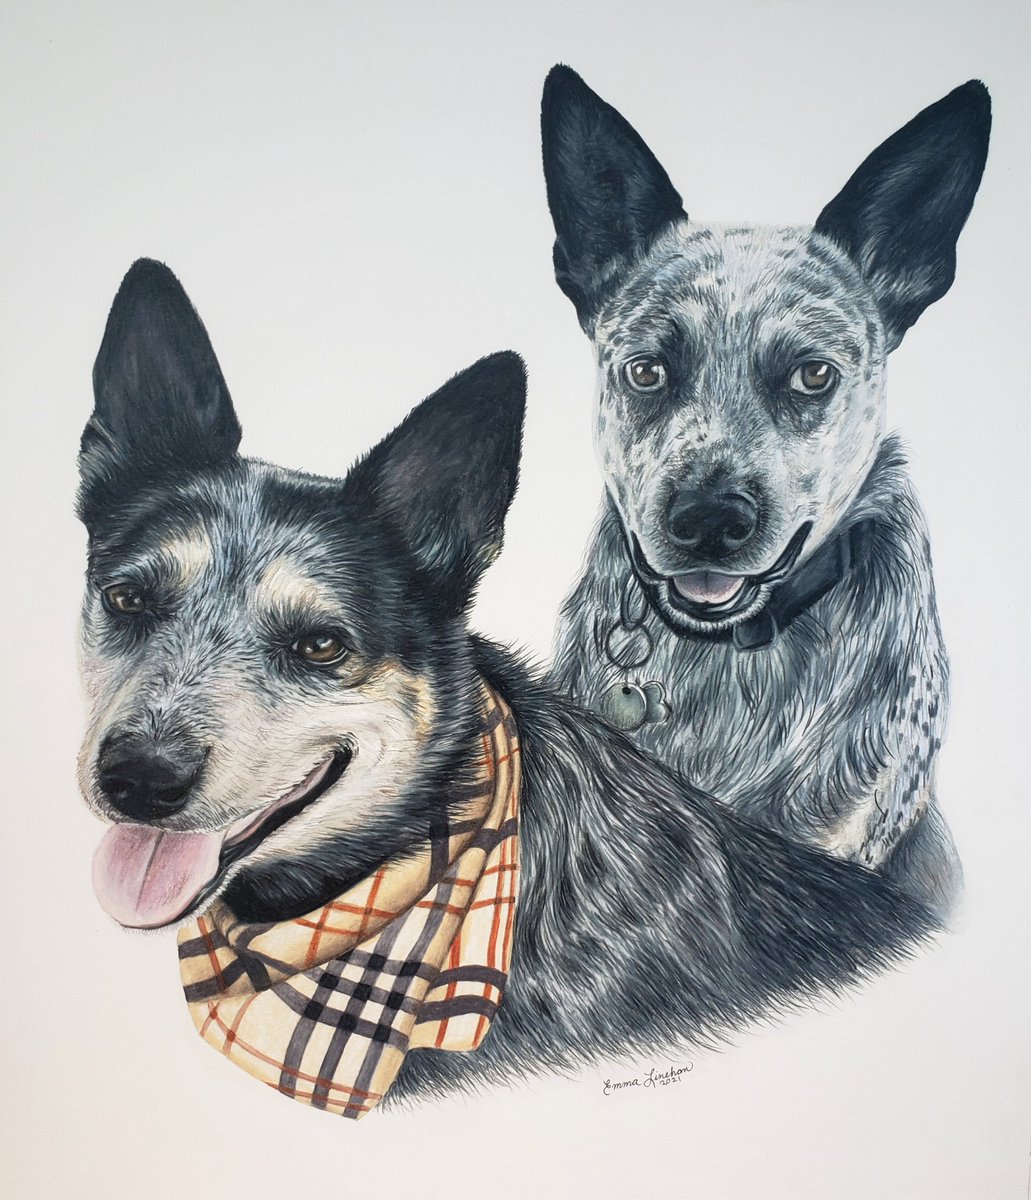 A commissioned tribute portrait of two close friends. 🙏🏻🐾 #petportraits #dogart #dogportraits #dogportraitartist #dogartist